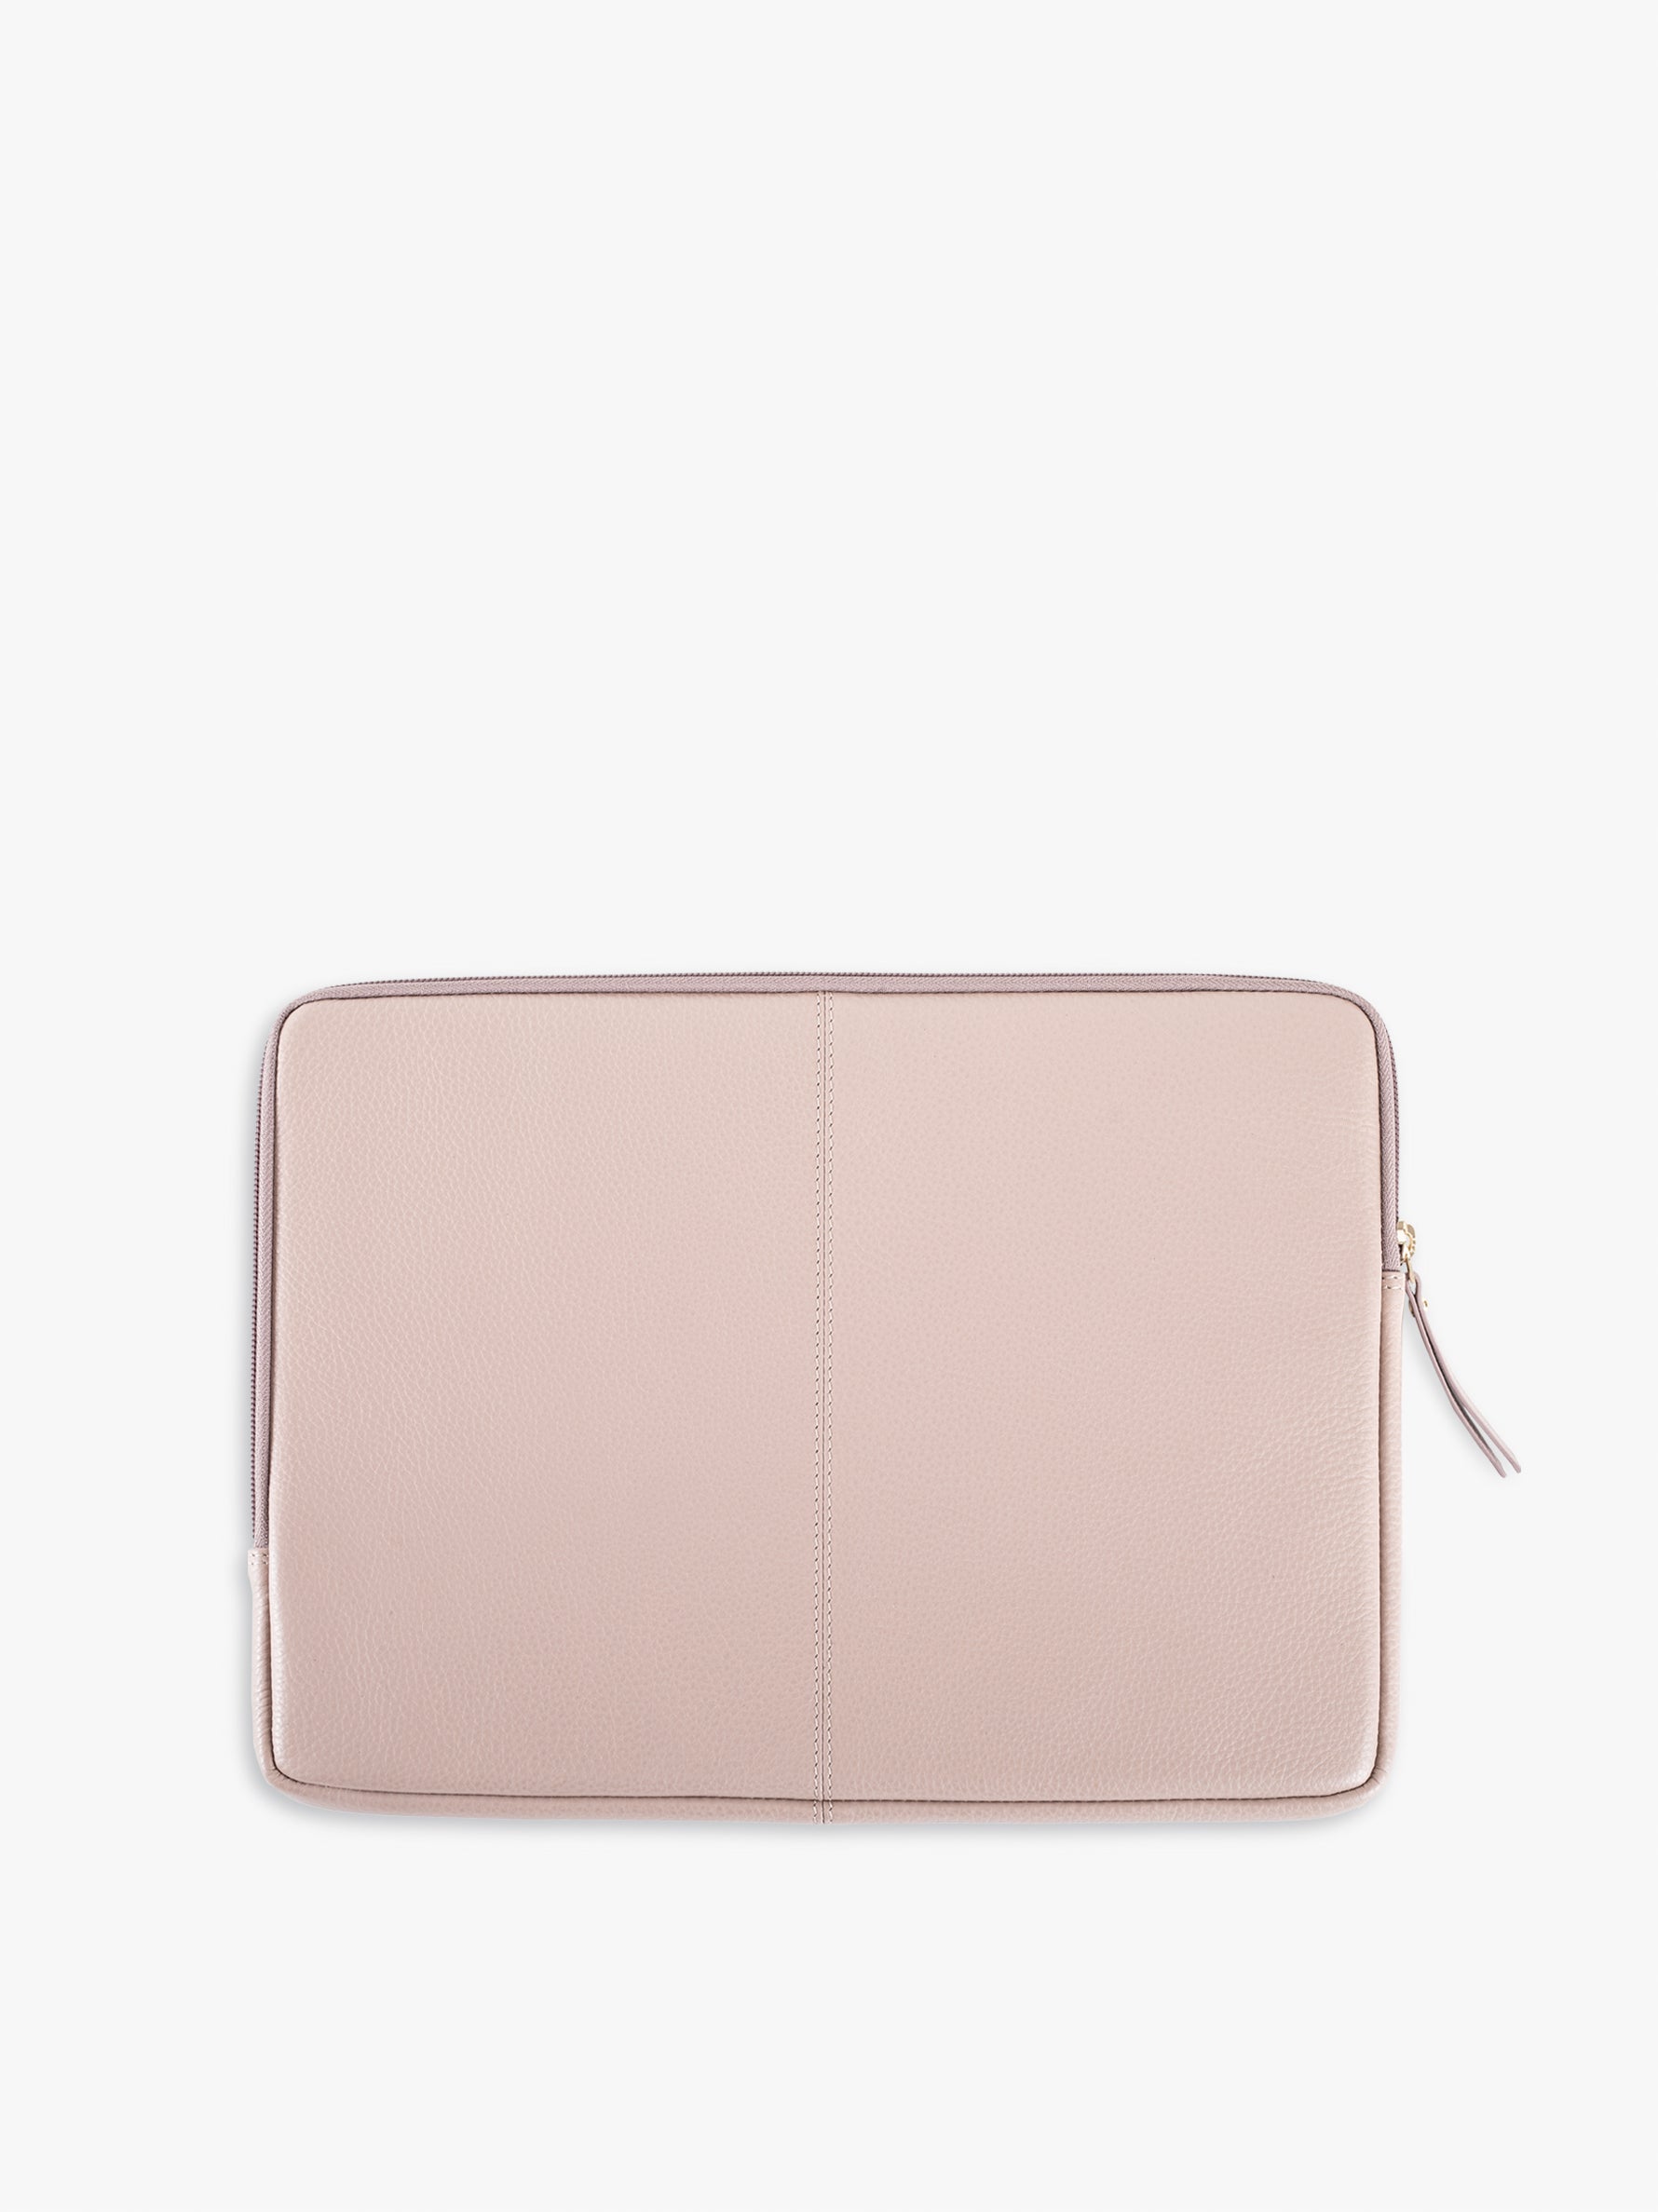 Handcrafted genuine leather classic laptop sleeve for women Nude Pink